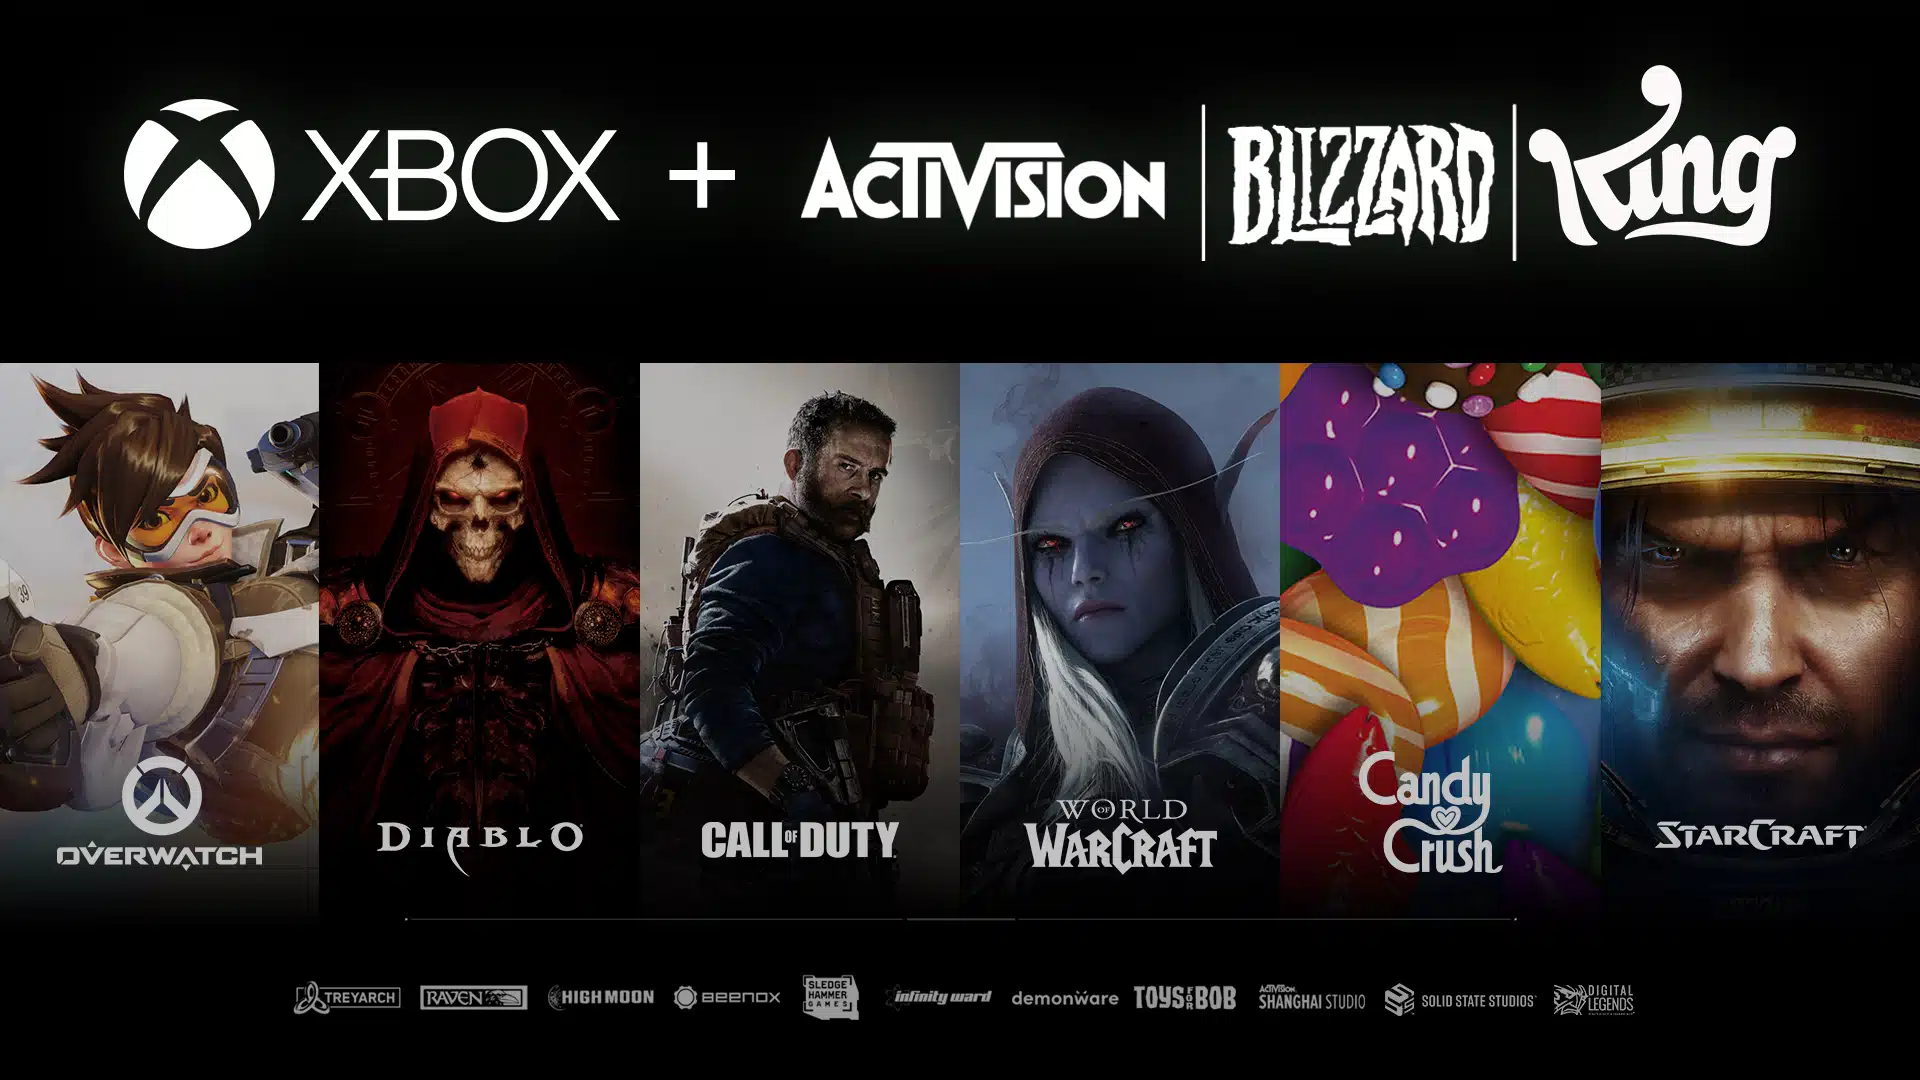 microsoft activision deal sony